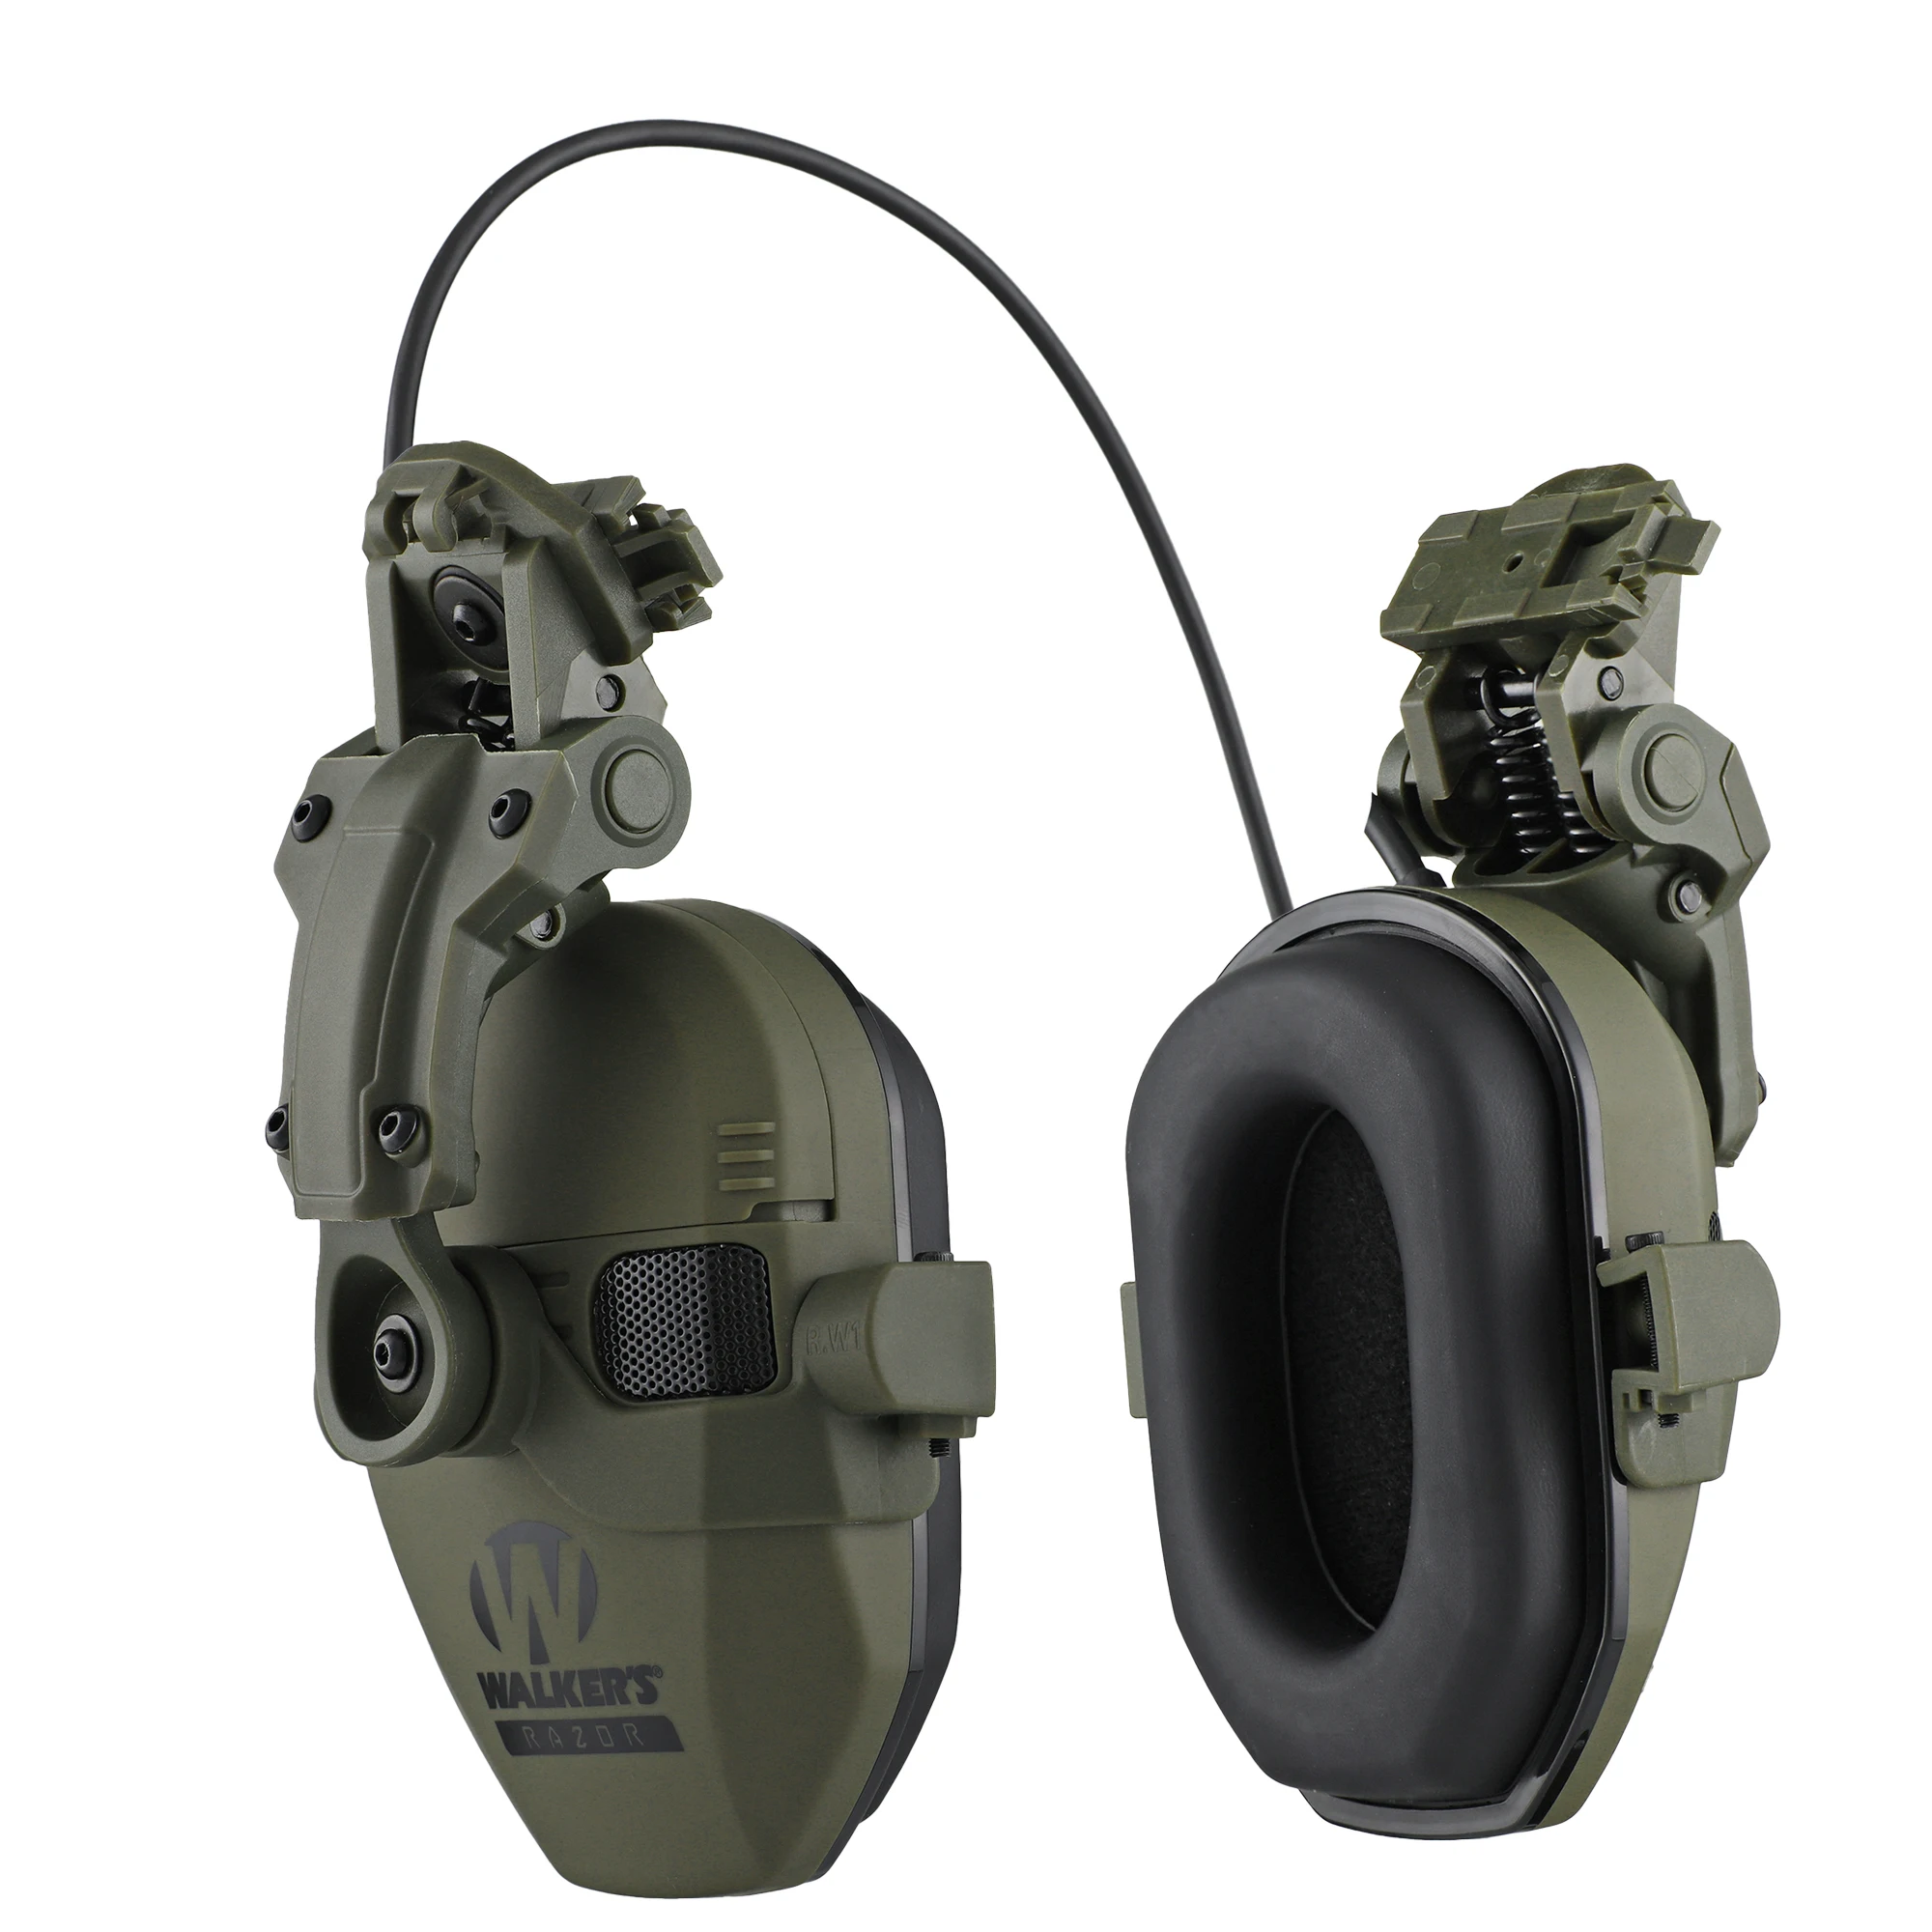 High Quality Tactical Hunting Shooting Headsets Outdoor Hunting Helmet Earmuff Airsoft Paintball Headset CS Wargame Headphone